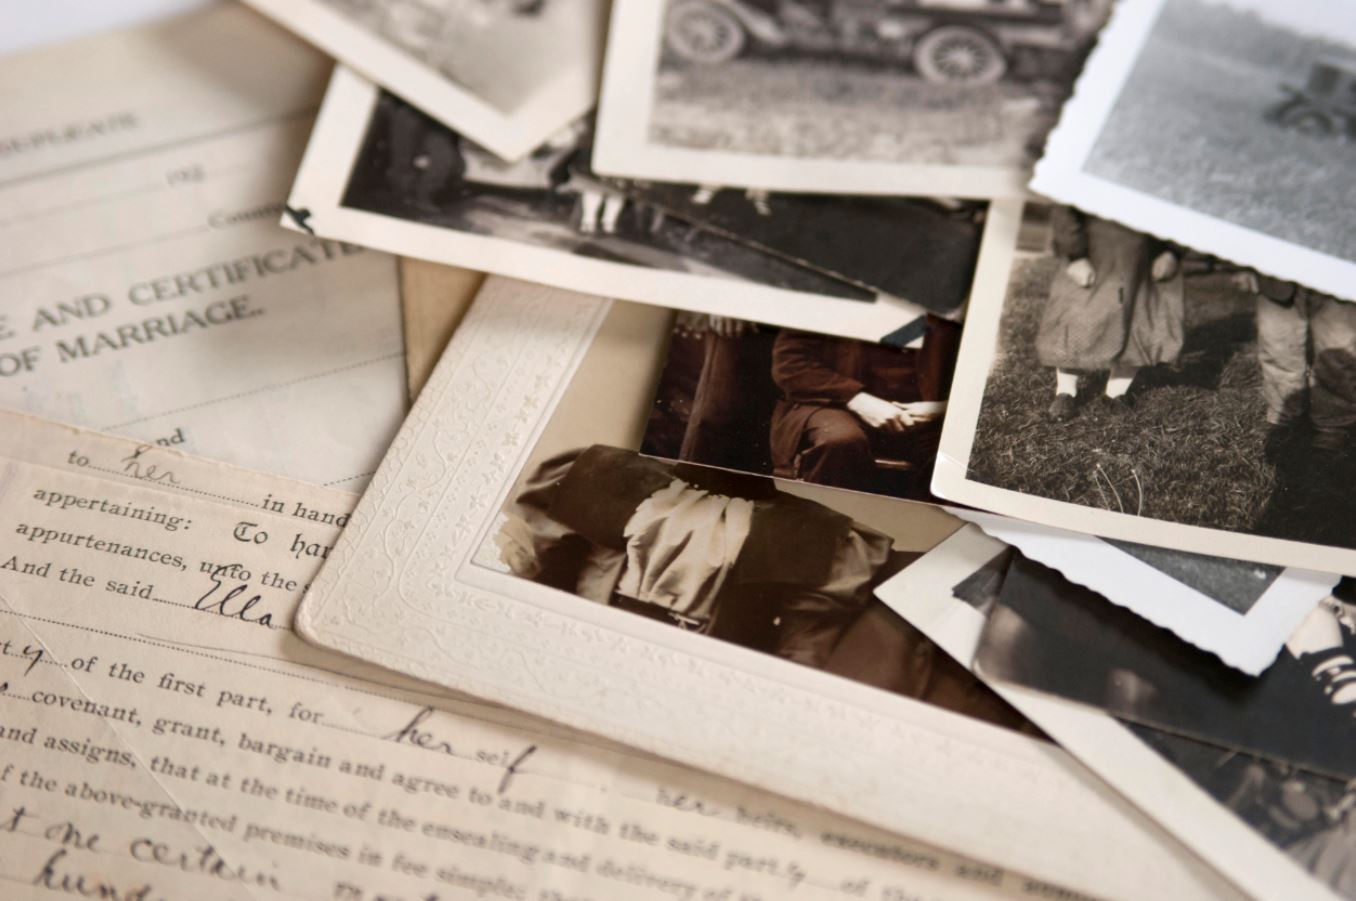 Old photos and hand written text